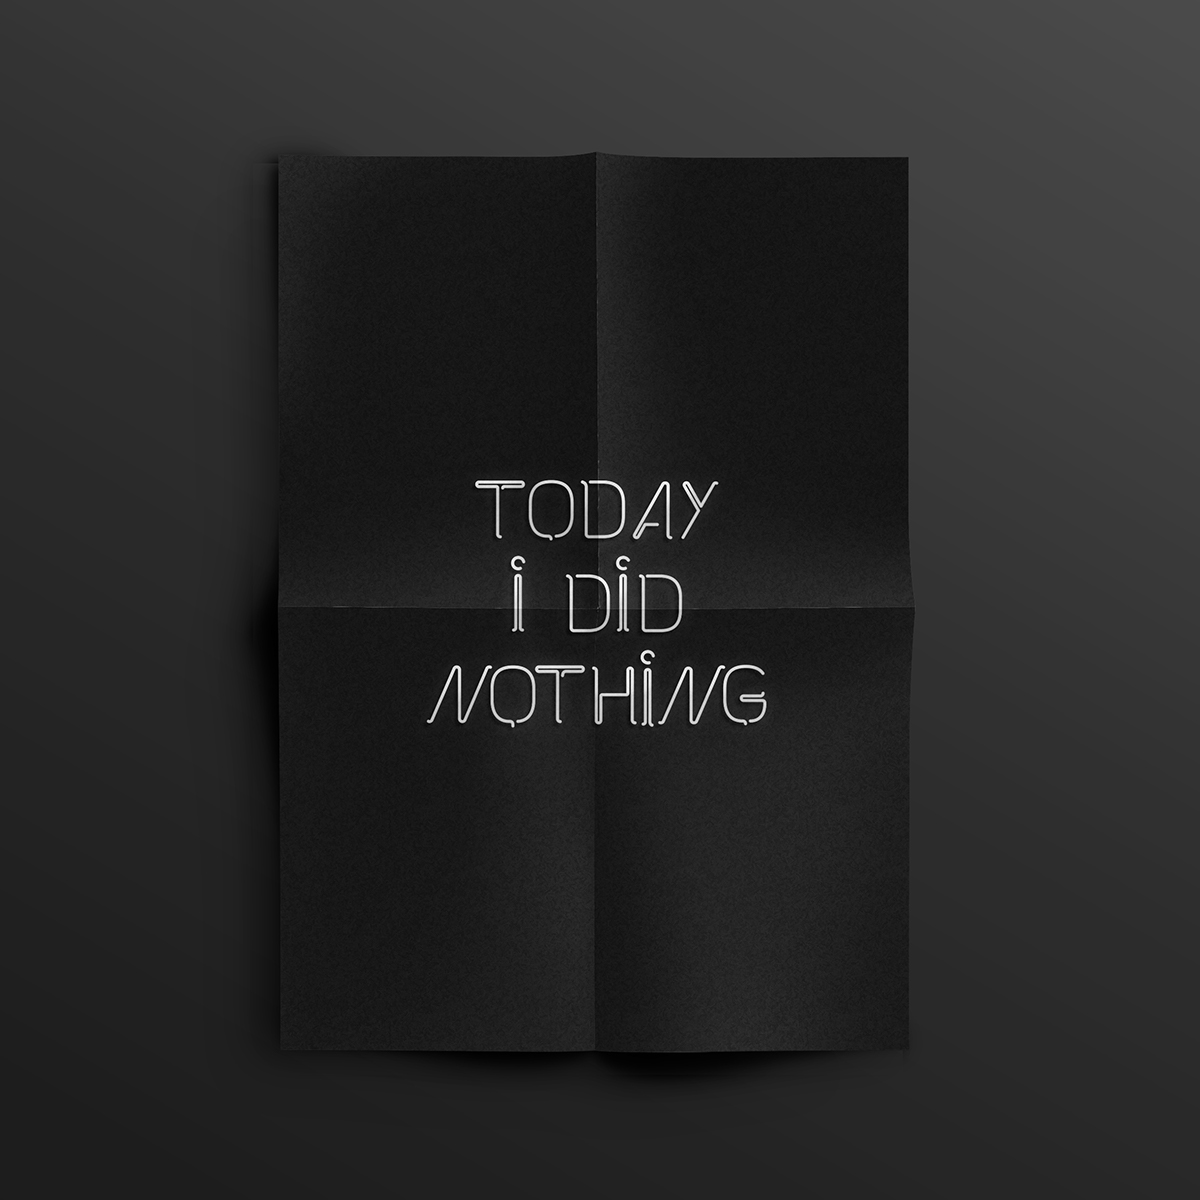 #apostereveryday #everydayposter project365 Poster Design poster funny Quotes #Ps25Under25 Ps25Under25